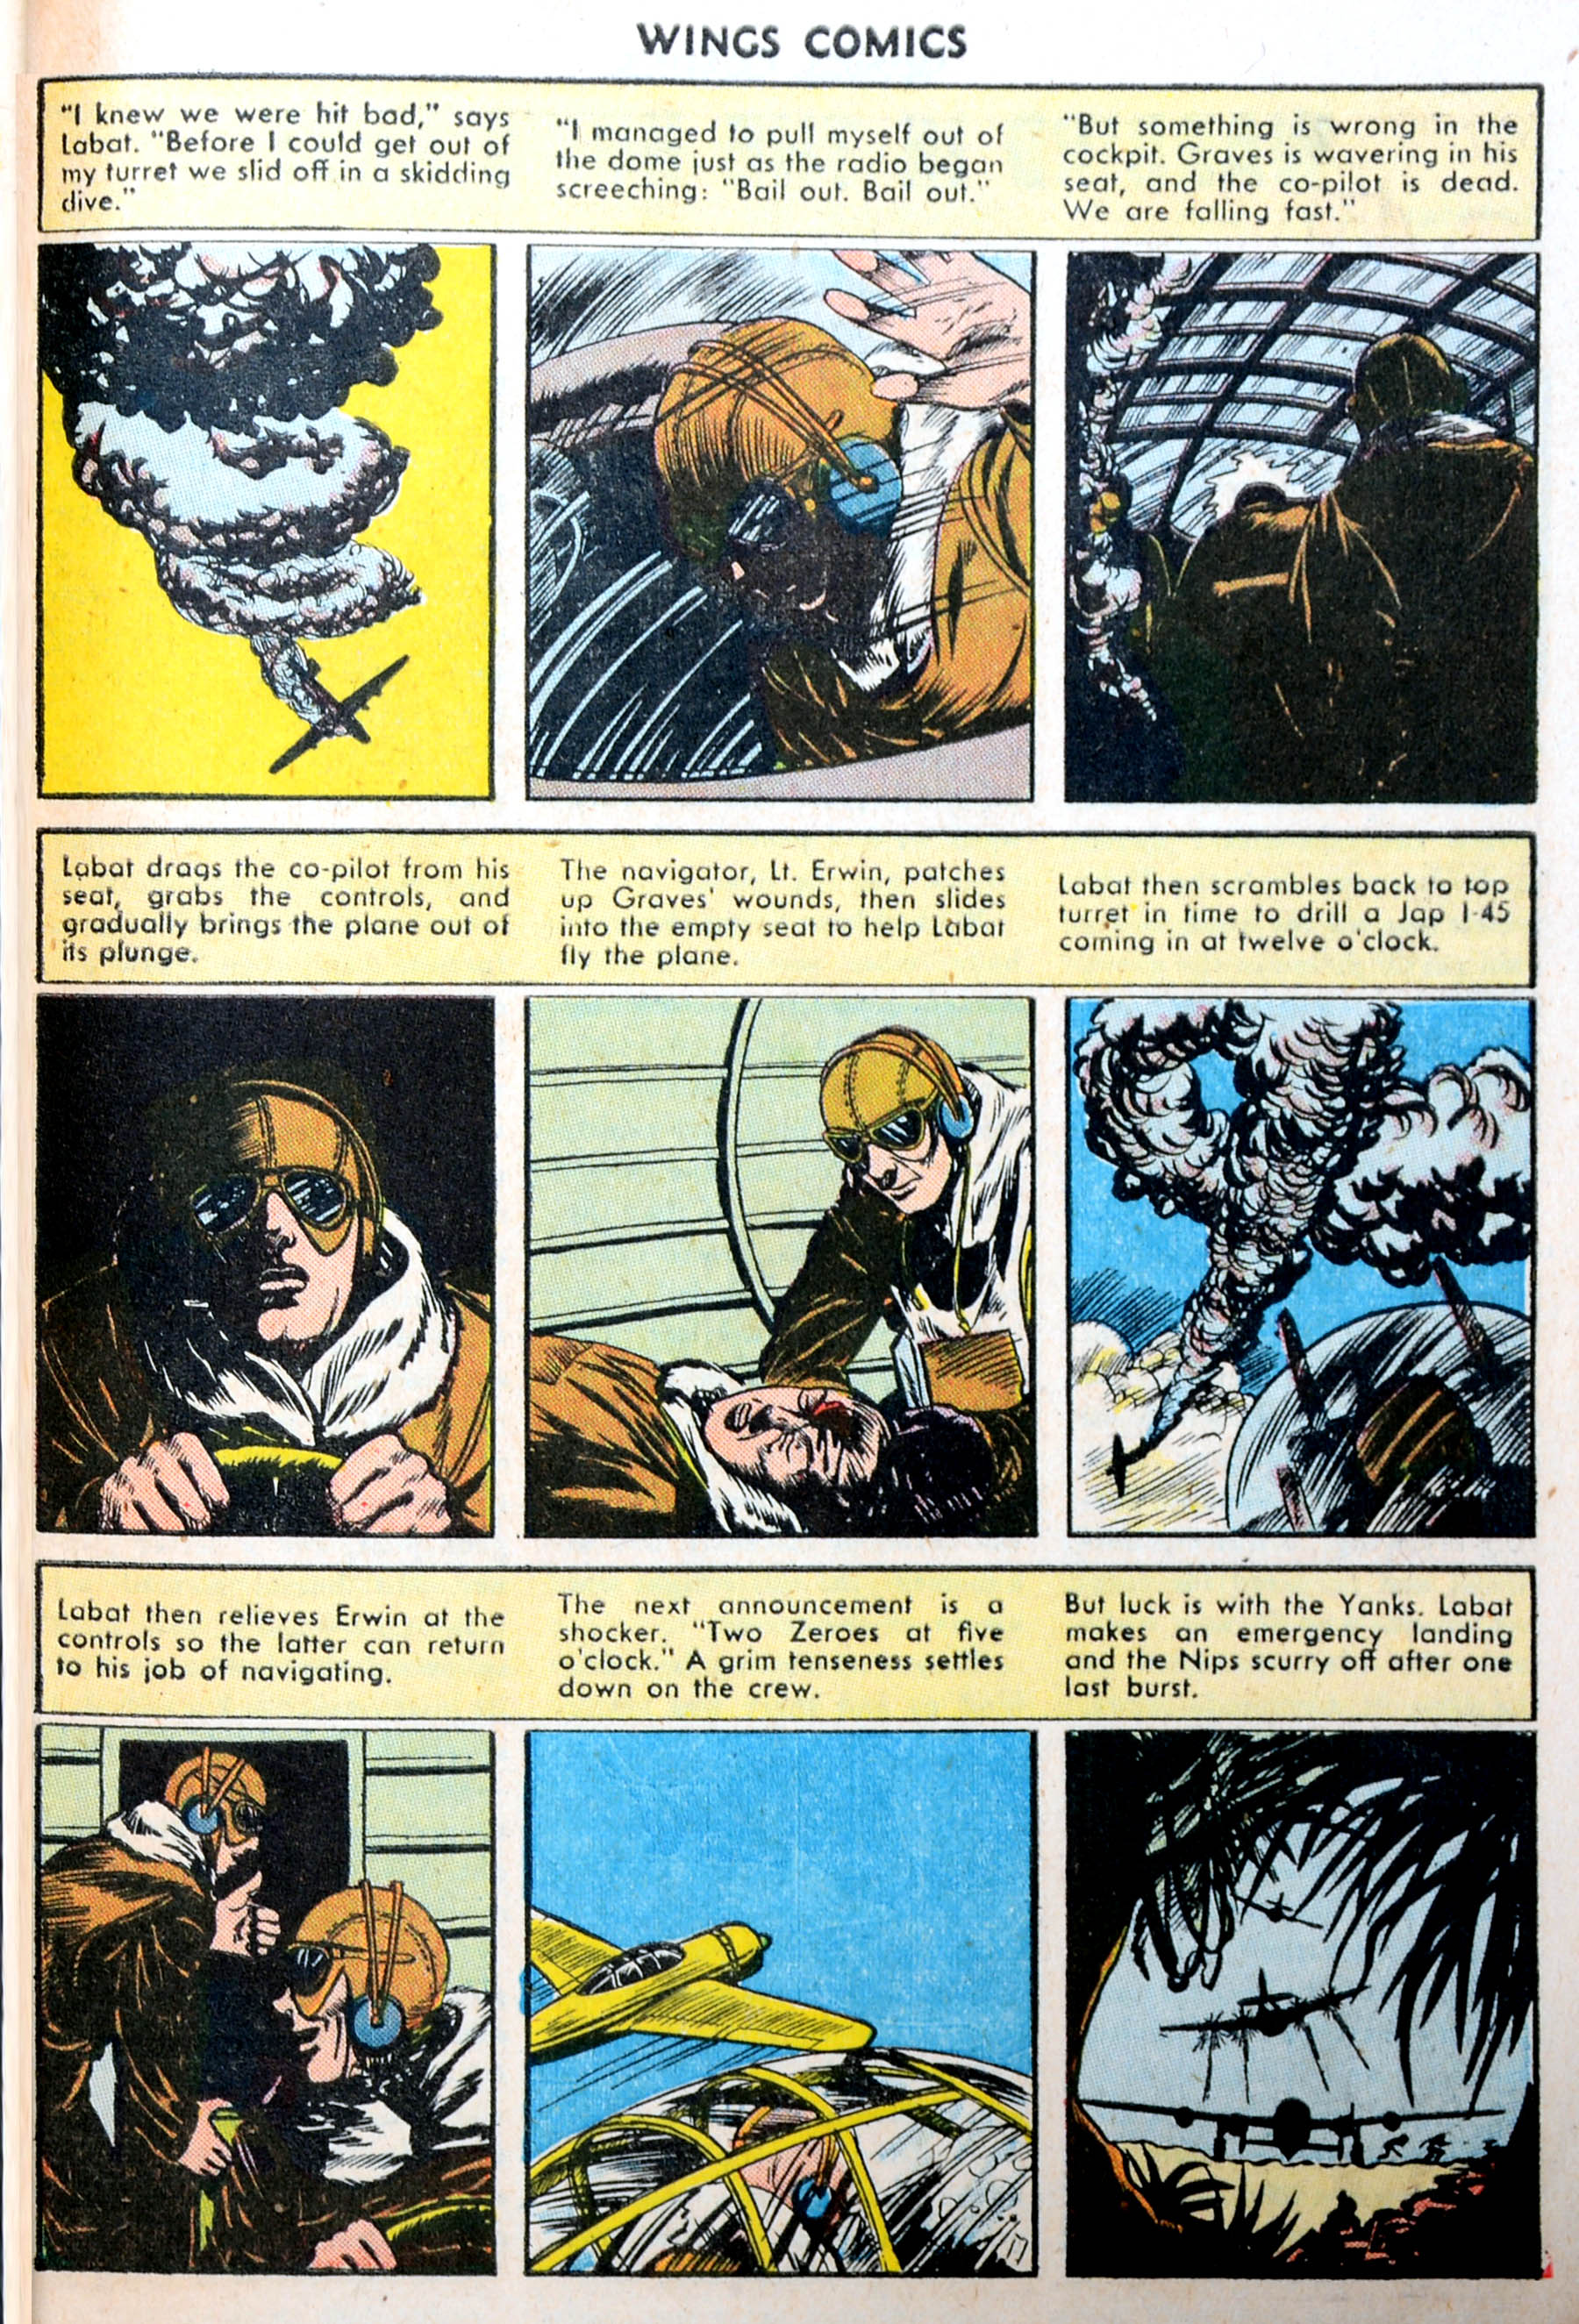 Read online Wings Comics comic -  Issue #47 - 41